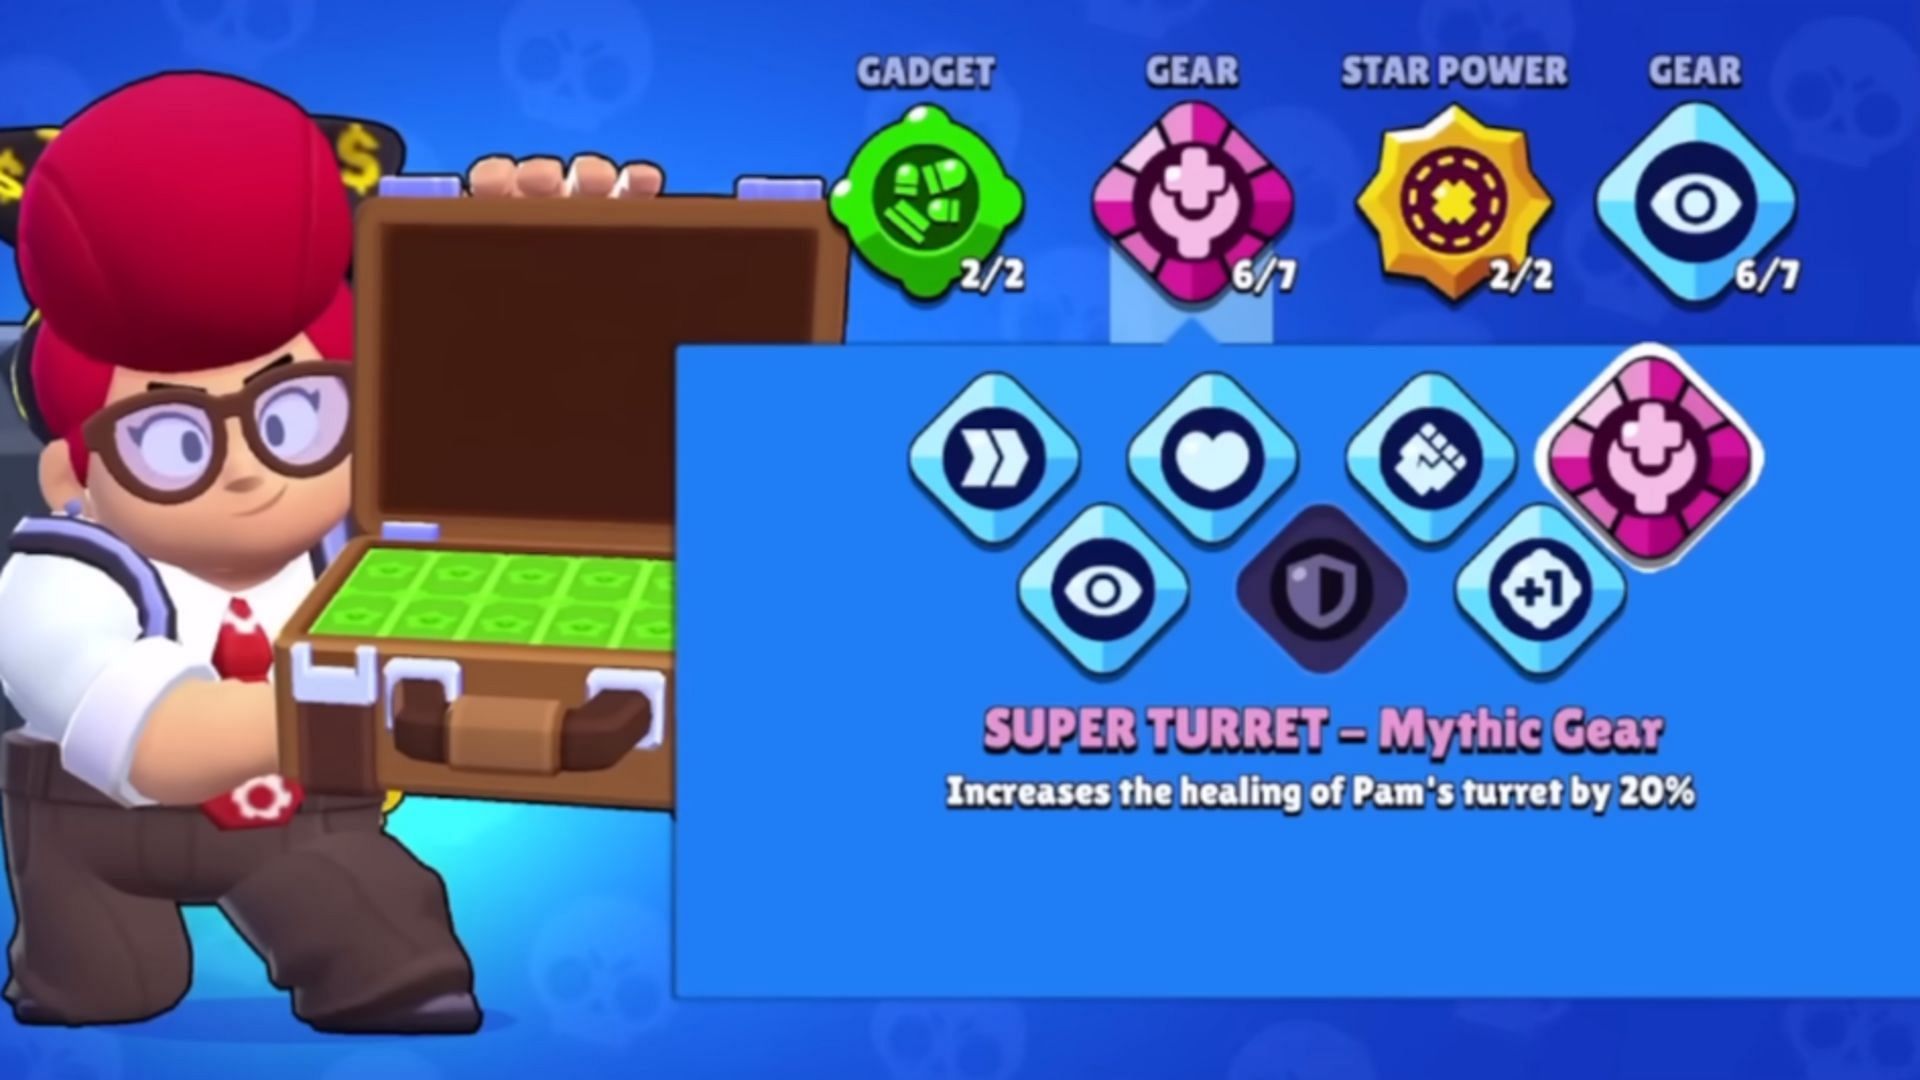 Super Turret - Mythic Gear (Image via Supercell)